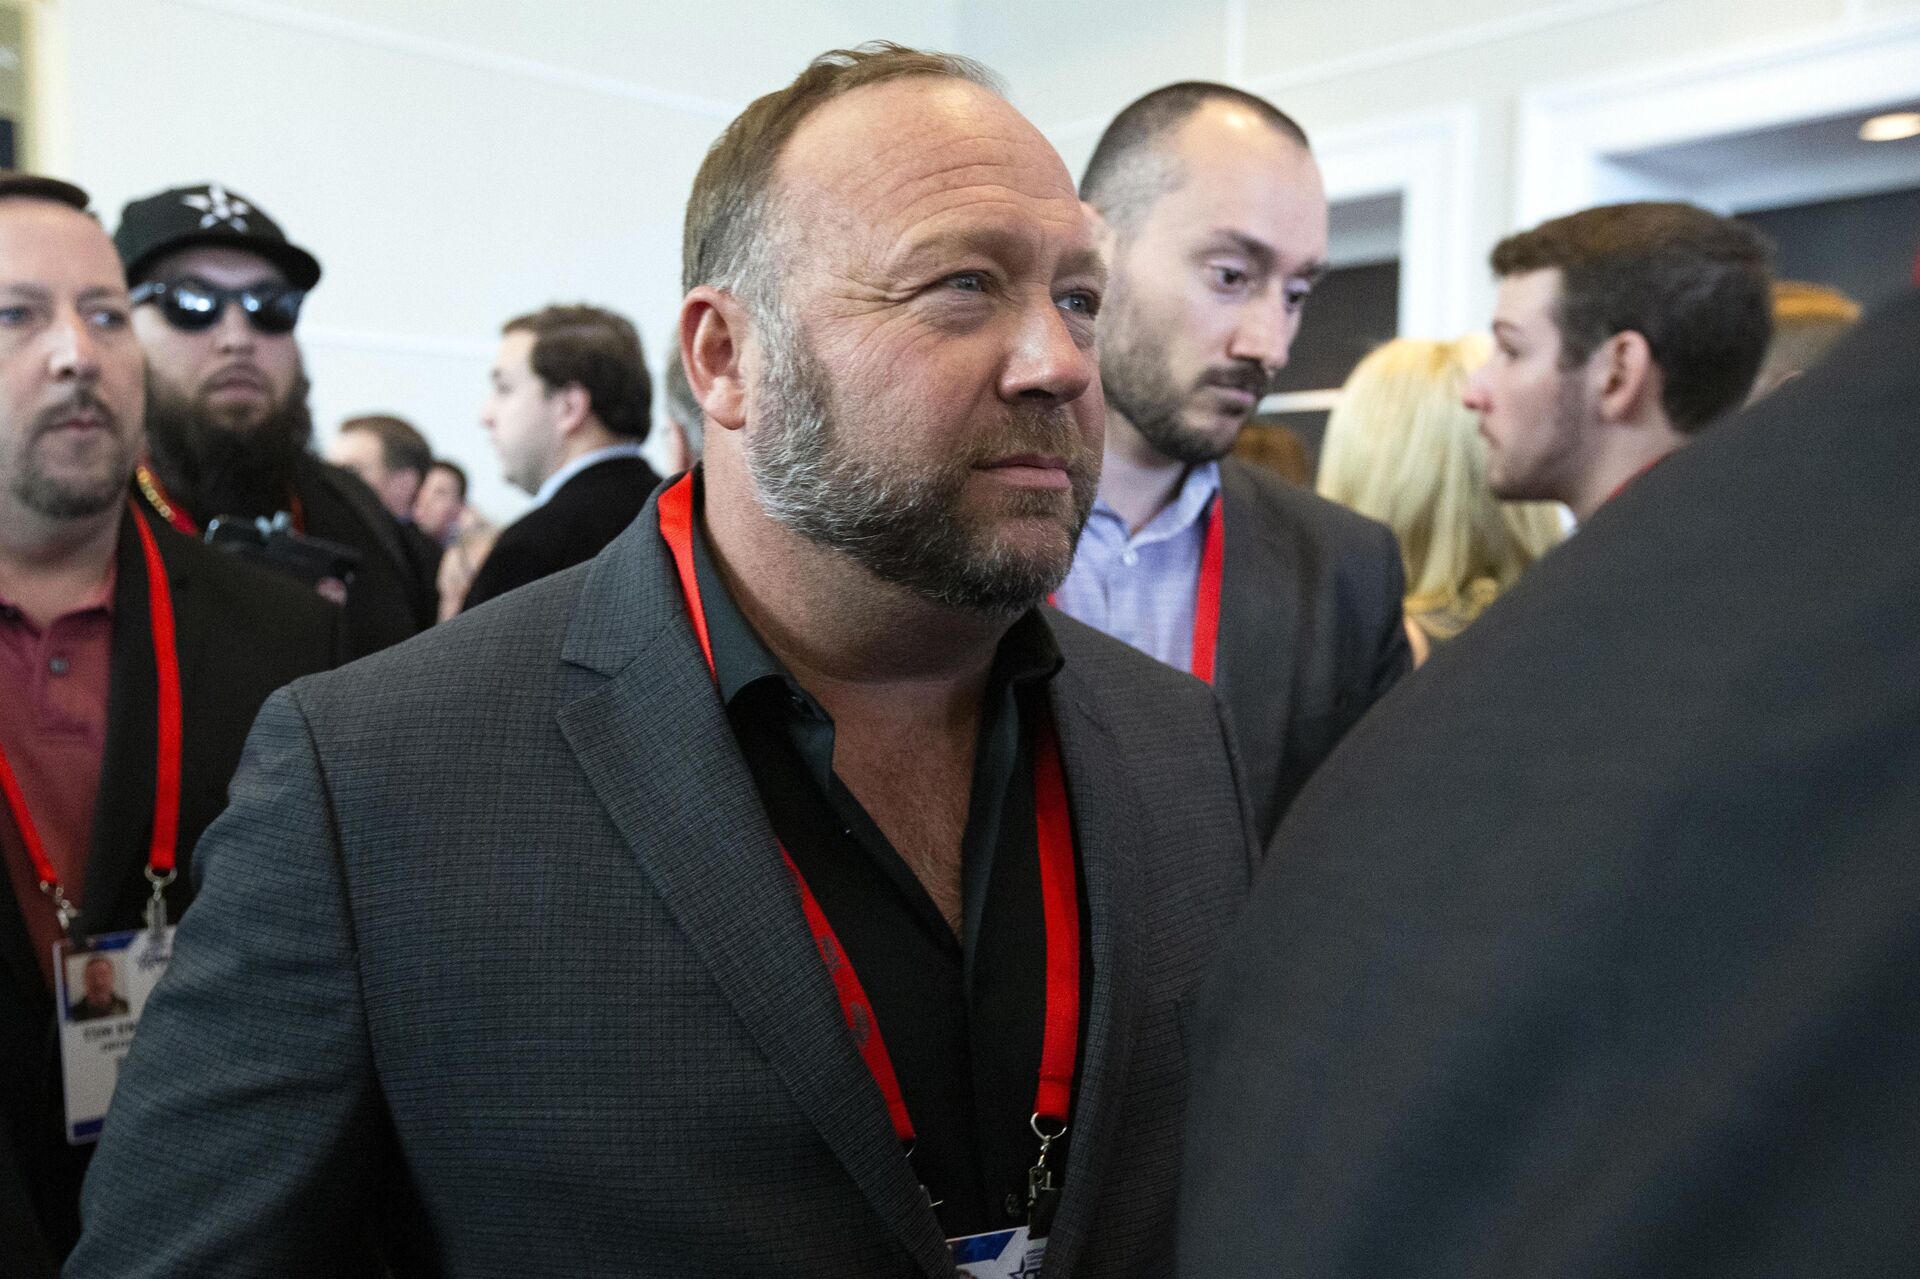 Conspiracy theorist Alex Jones walks at the Conservative Political Action Conference, CPAC 2020, at the National Harbor, in Oxon Hill, Md., Thursday, Feb. 27, 2020 - Sputnik International, 1920, 22.11.2021